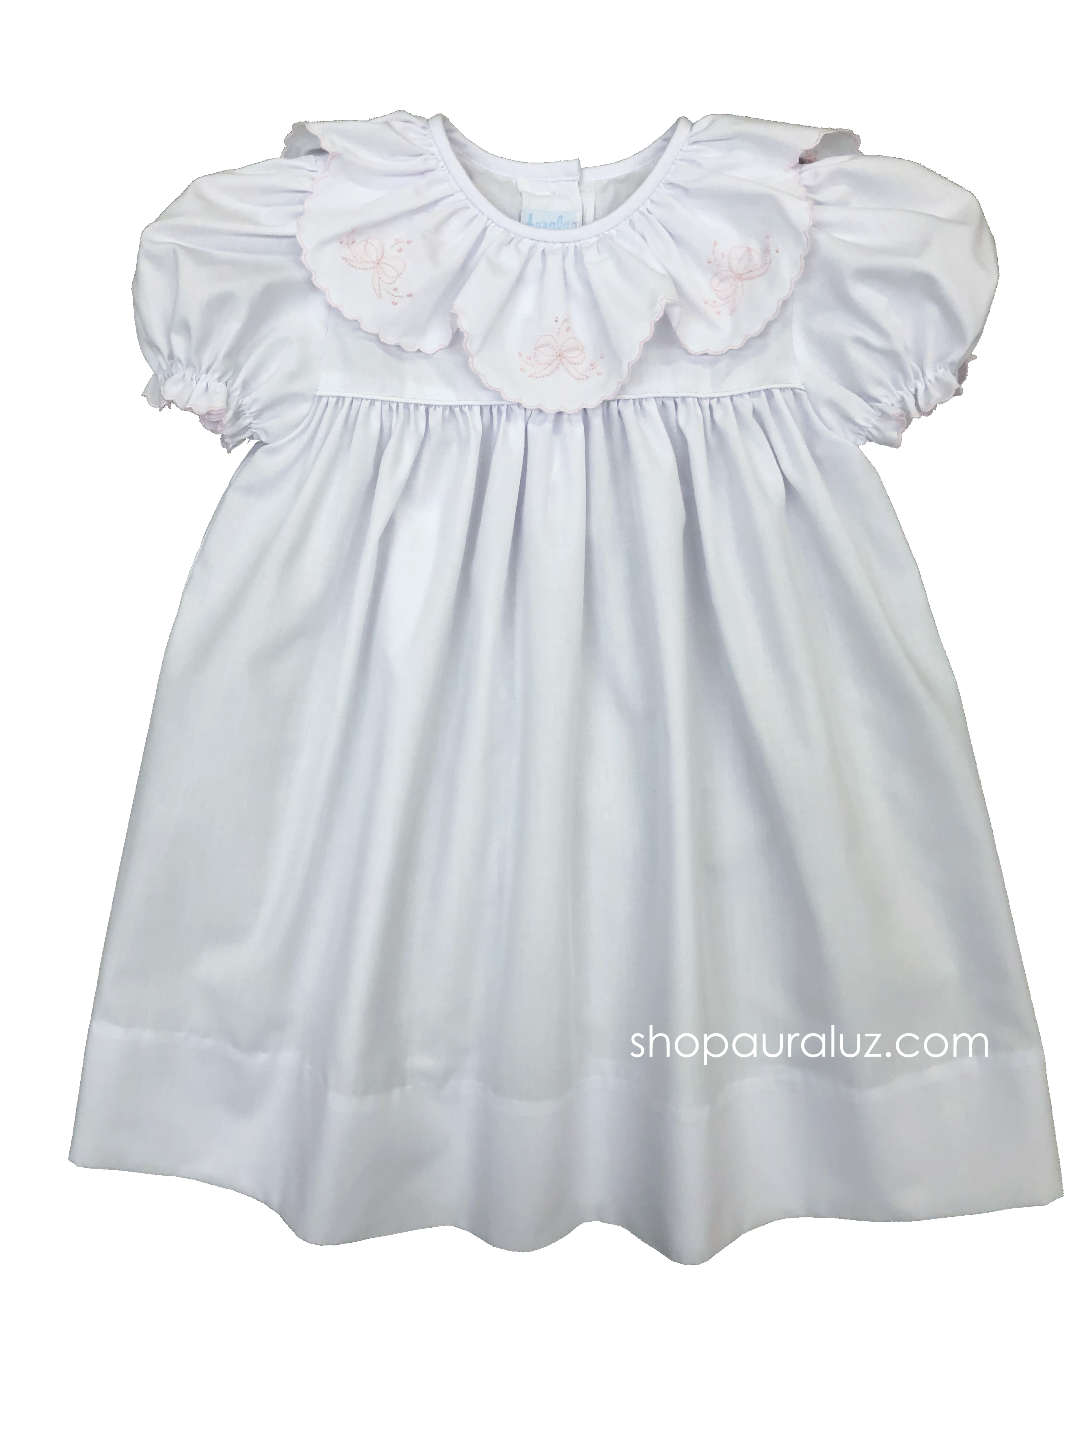 Auraluz DressWhite with ruffle collar, pink scallop trim and embroidered  bows